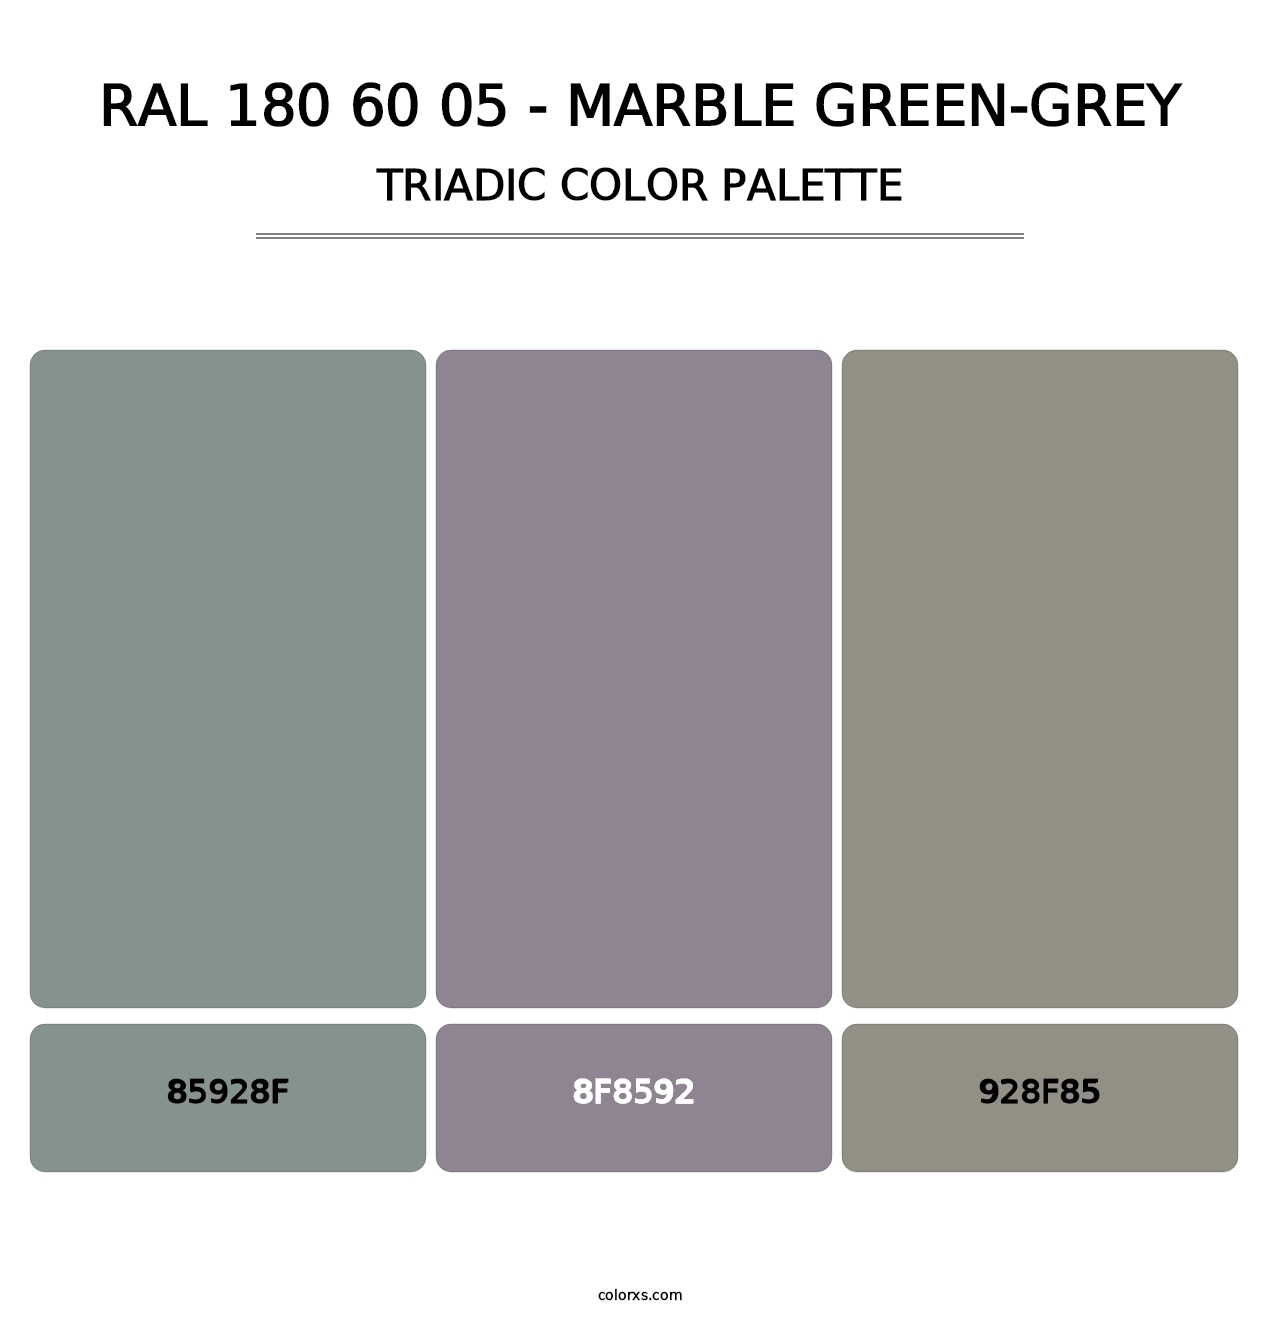 RAL 180 60 05 - Marble Green-Grey - Triadic Color Palette